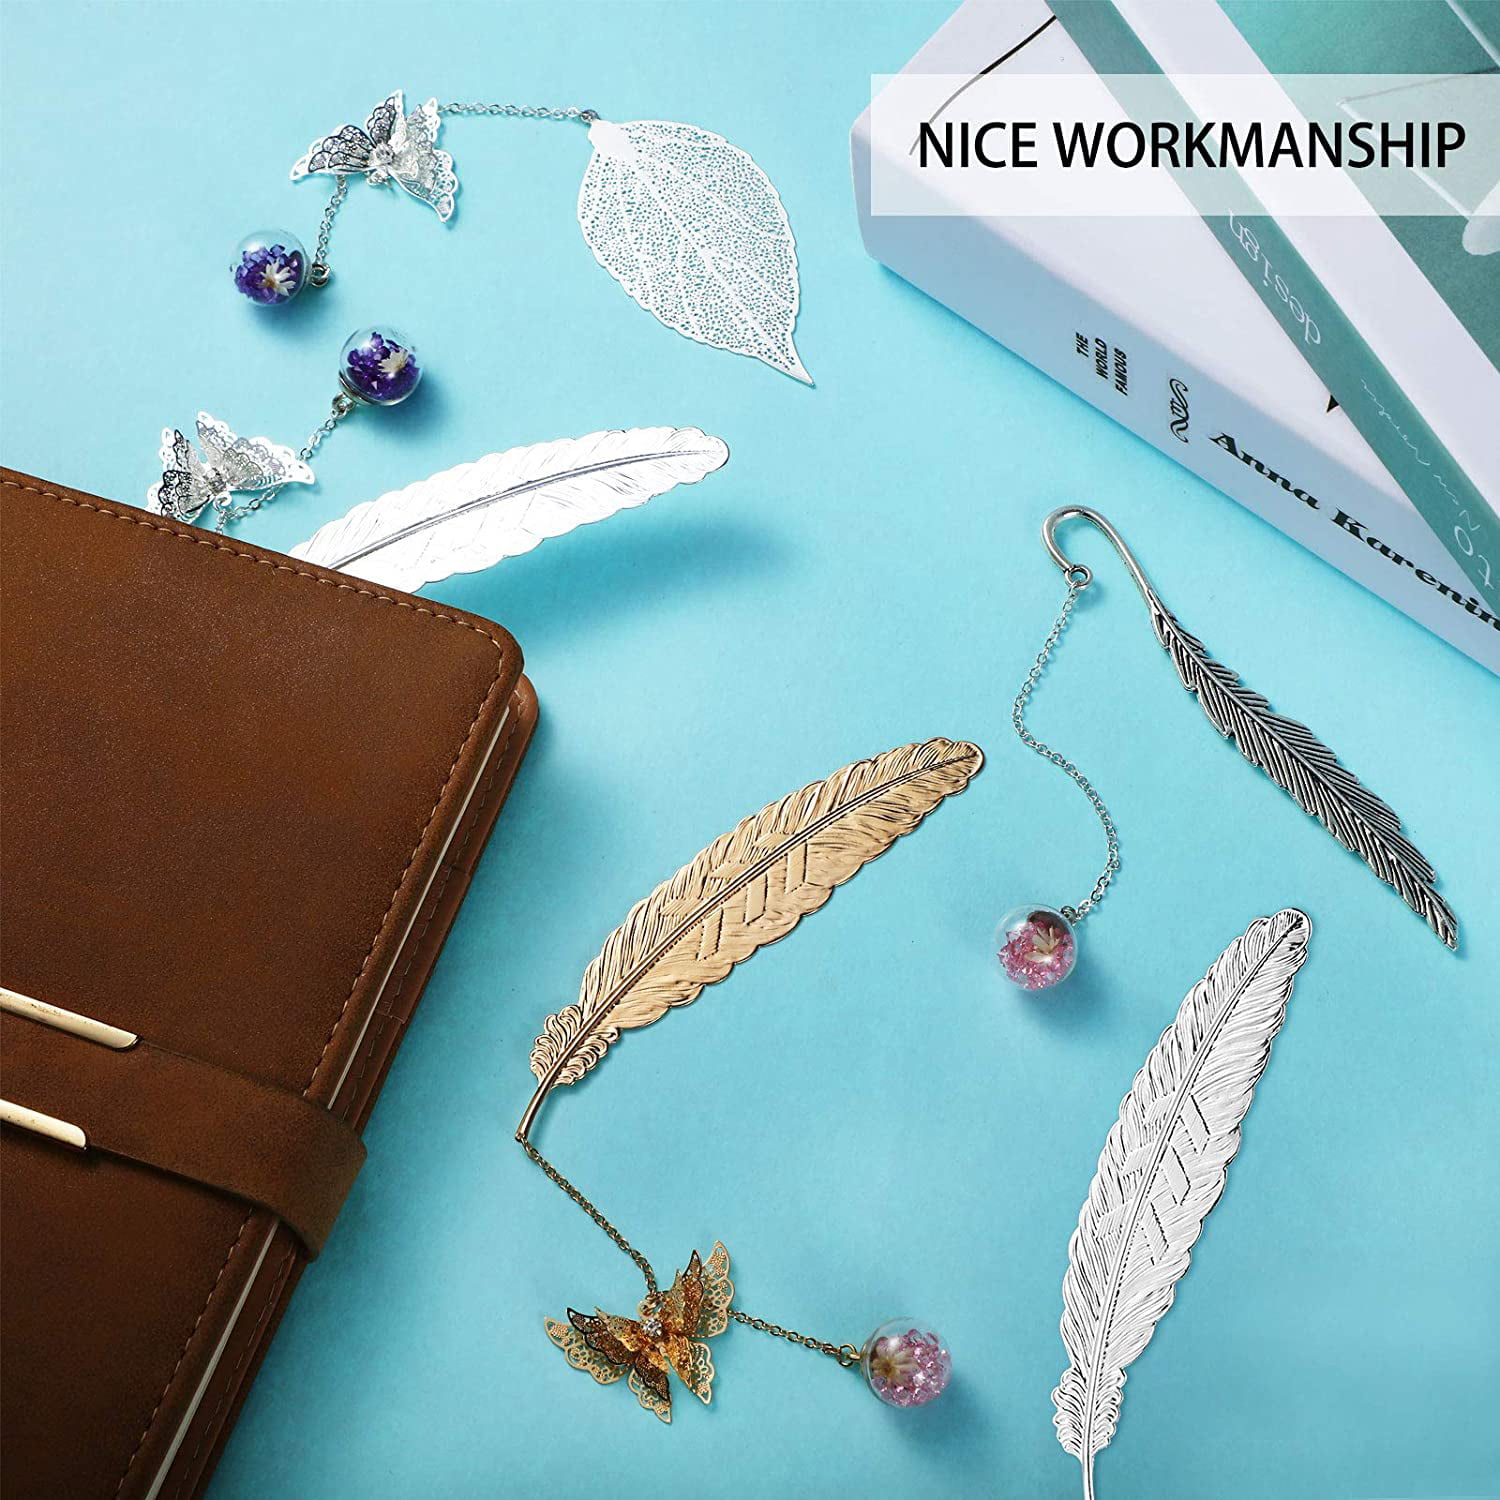 6 Pieces Metal Feather Bookmark Metal Leaf Bookmark with Book Clip Pendant 3D Butterfly Pendants Glass Dry Flower Beads Pendant for Reading Adults Kids Students Present Silver Gold Three Models